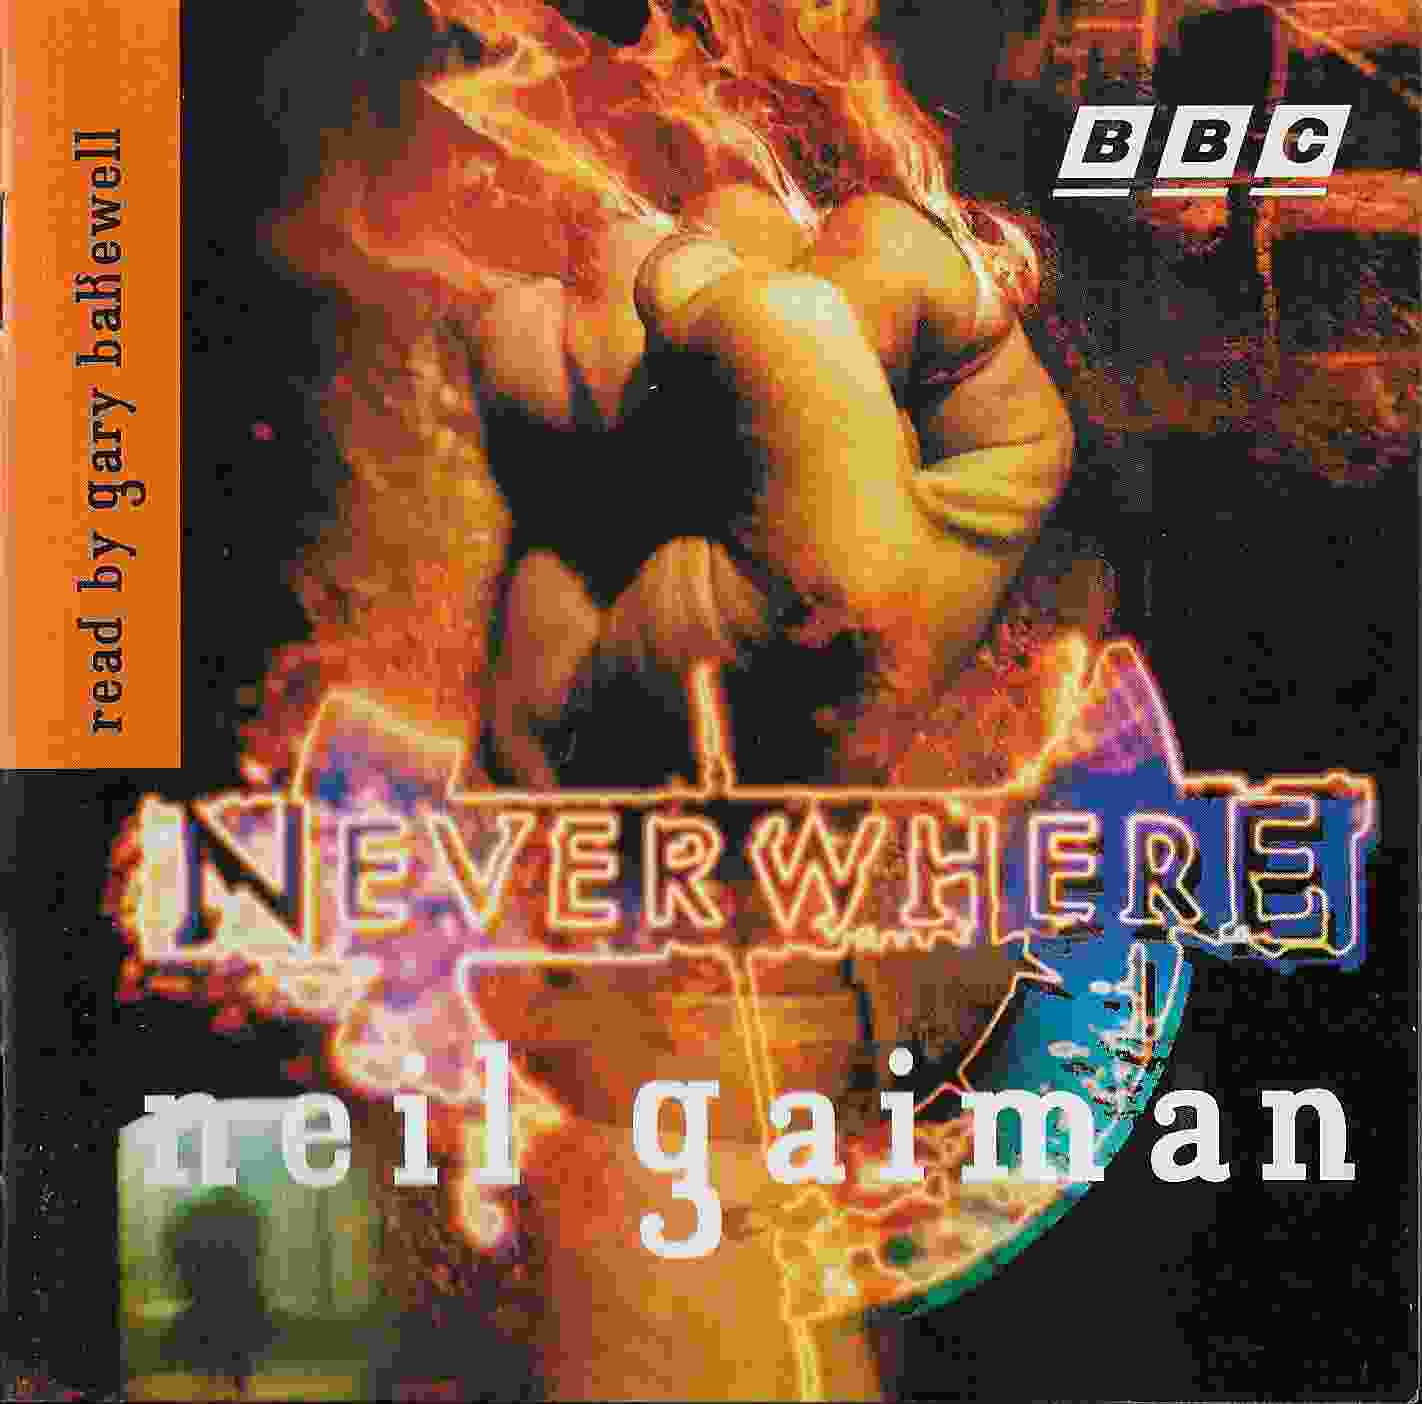 Picture of ZBBC 1944 CD Neverwhere by artist Gary Bakewell from the BBC cds - Records and Tapes library